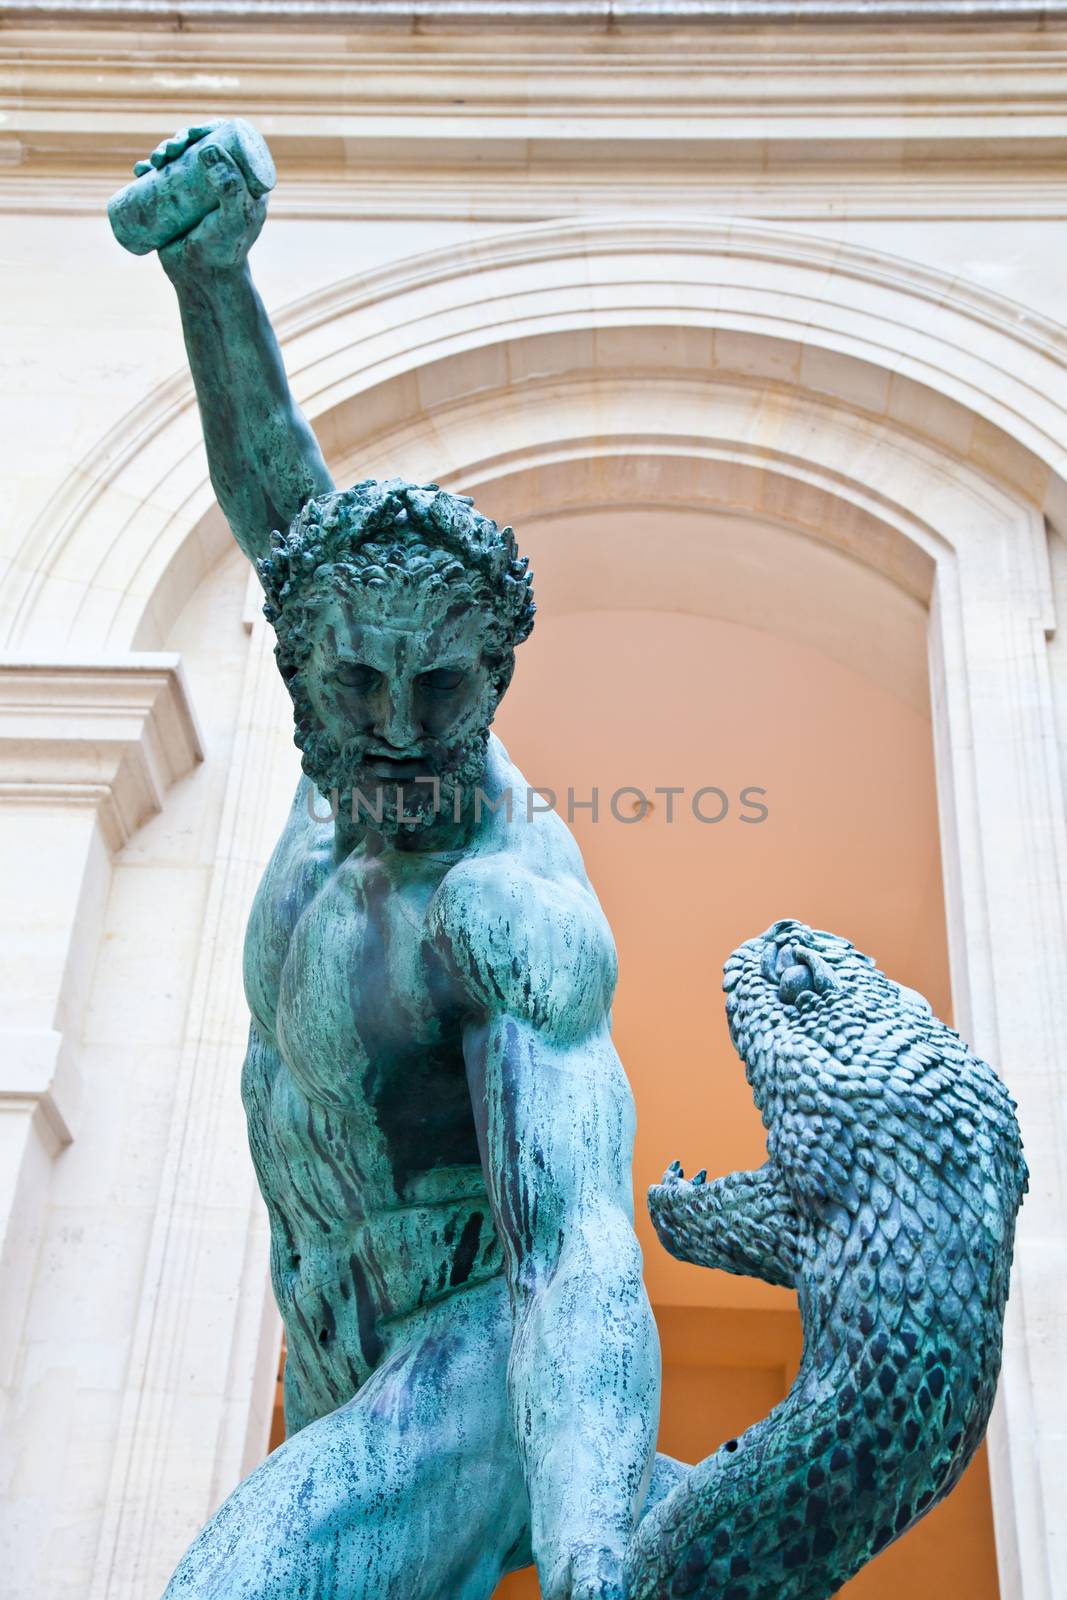 Bronze statue in Luovre museum, Editorial use only